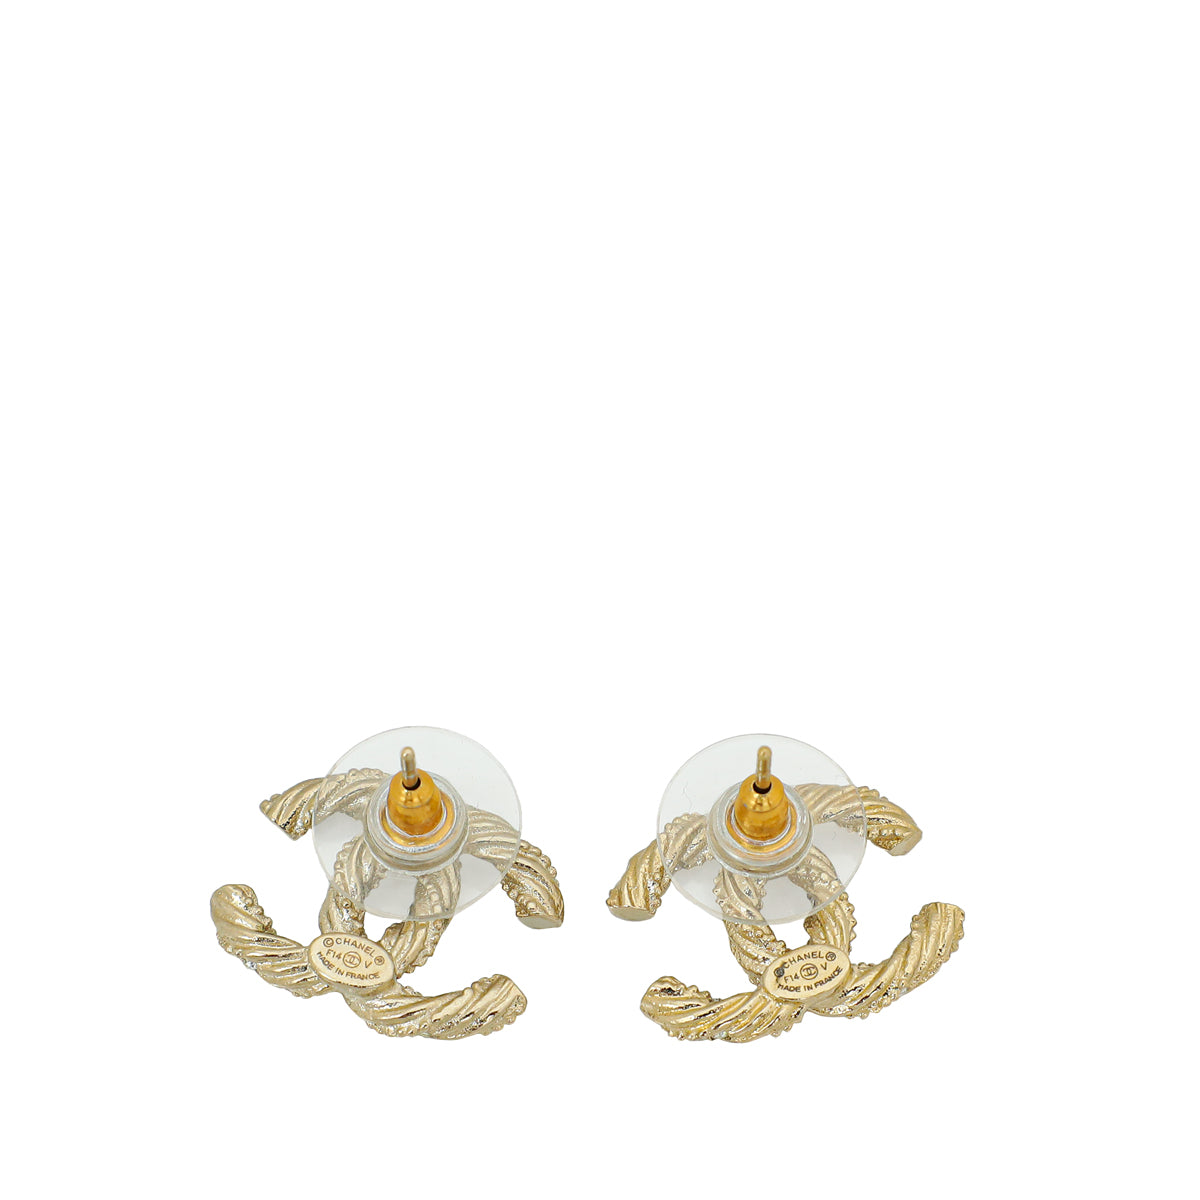 Chanel Gold CC Twisted Crystal Earrings